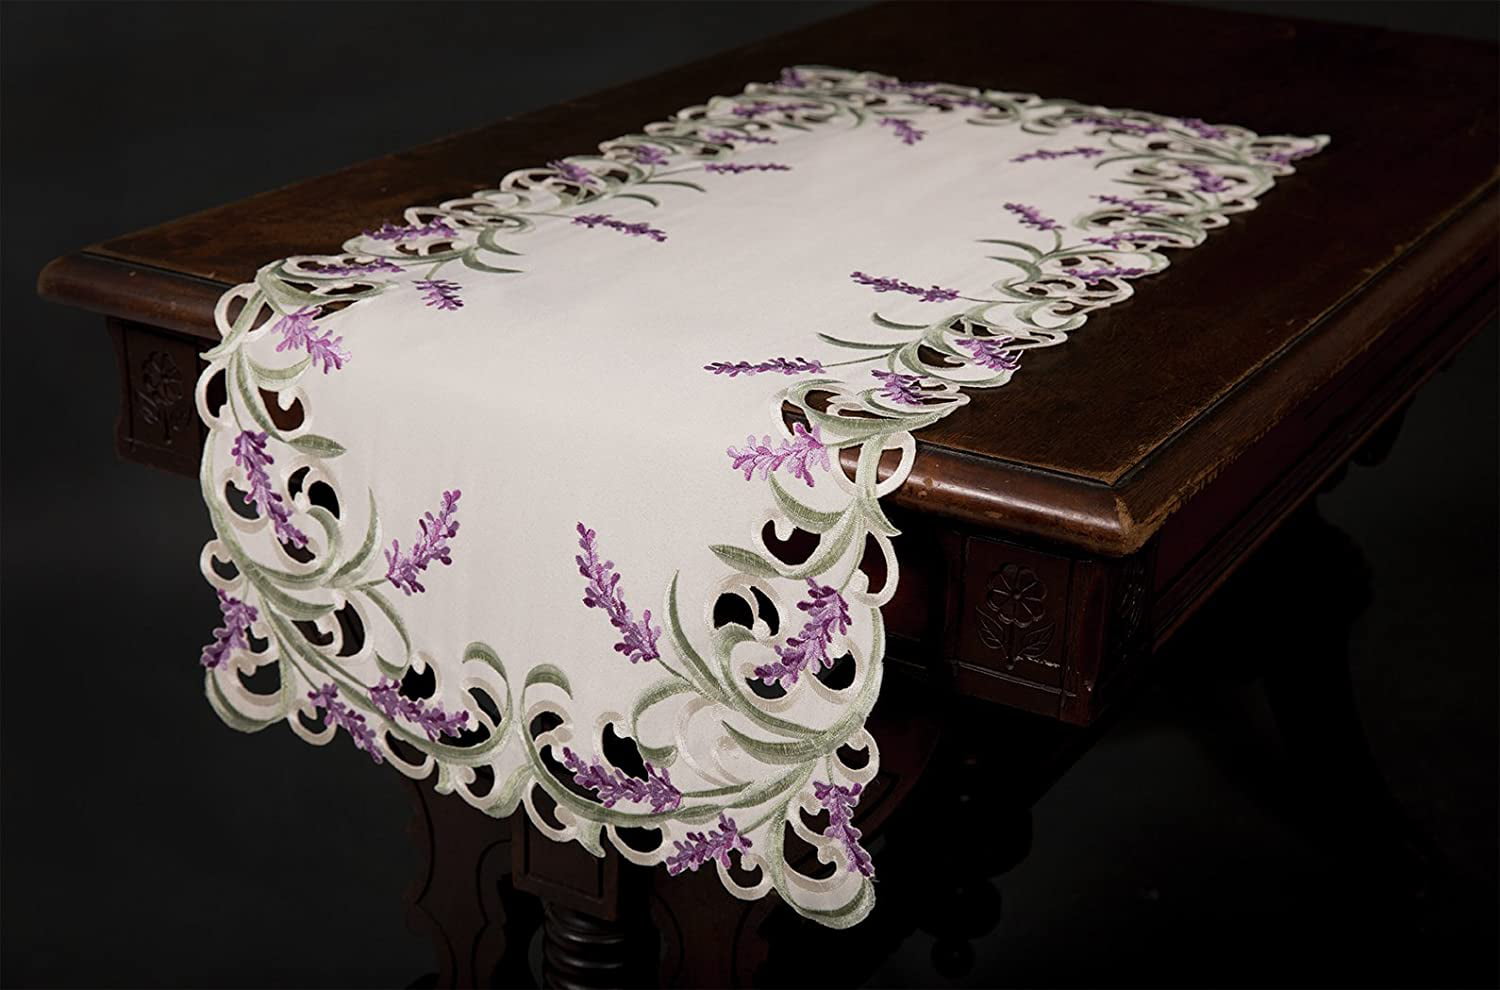 XD17107 Lavender Lace Embroidered Cutwork Table Runner, 15 by 34 